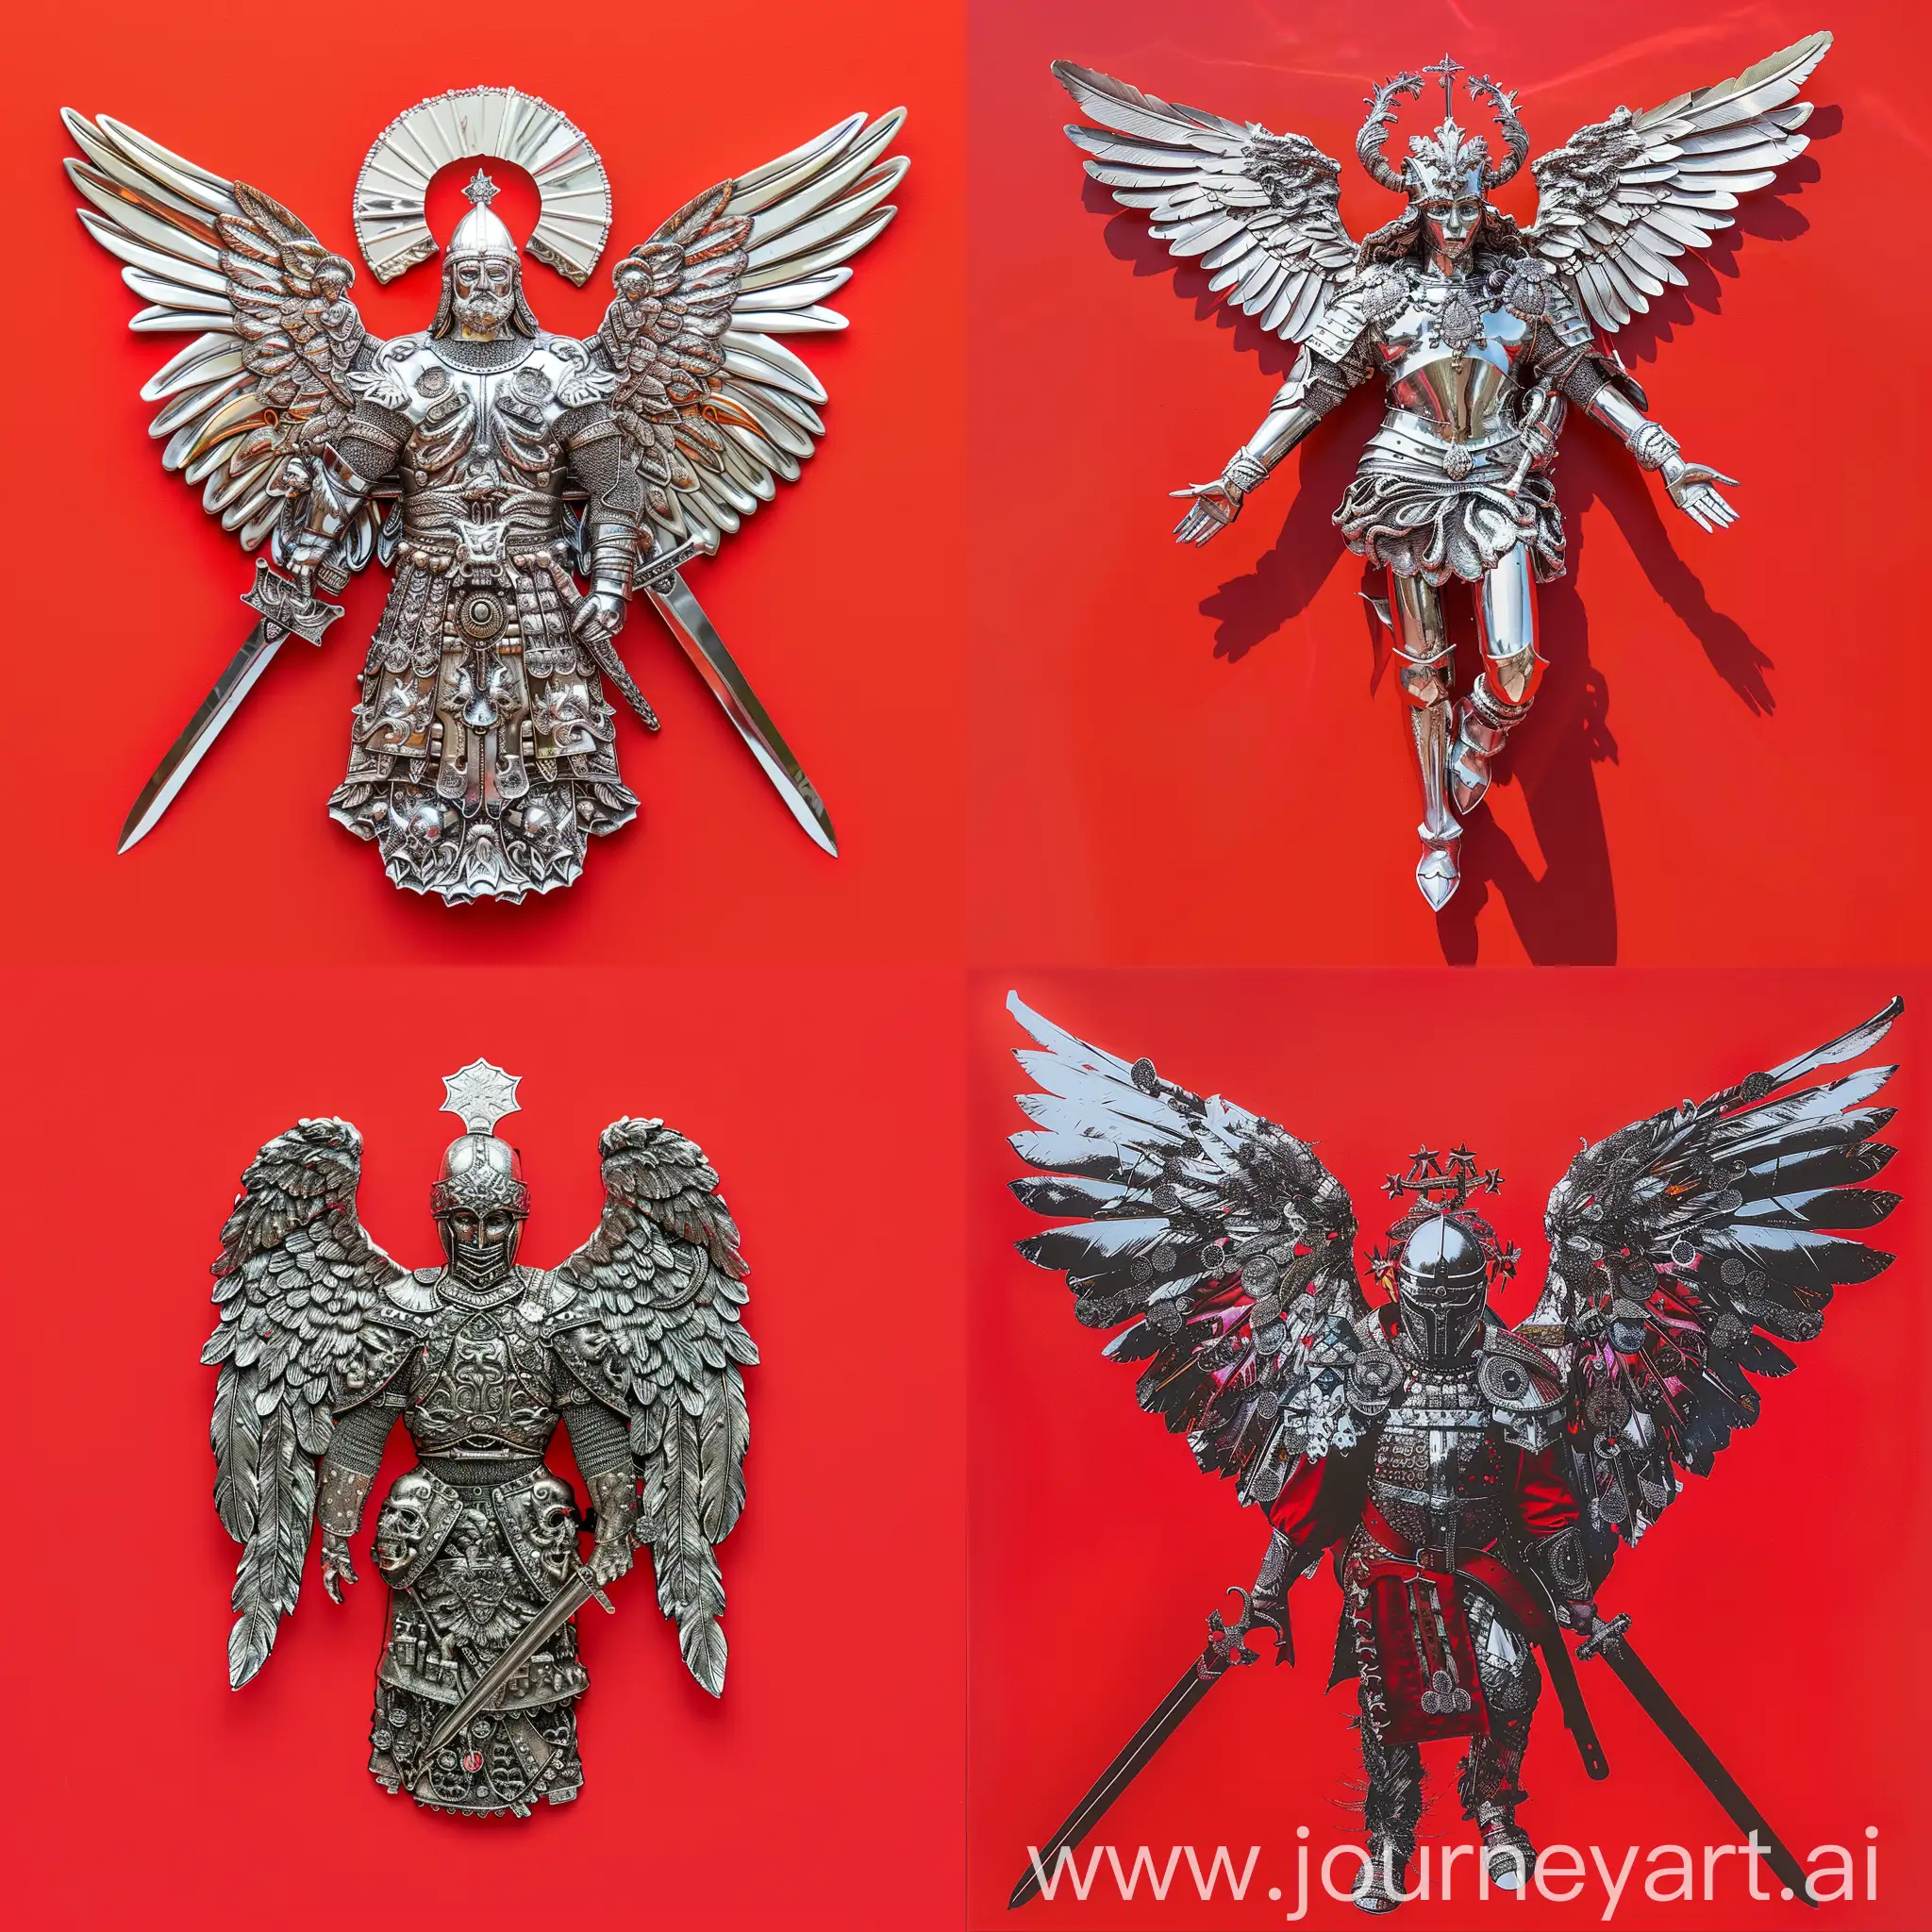 Silver-Angelic-Slavic-Warrior-in-Vibrant-Red-Setting